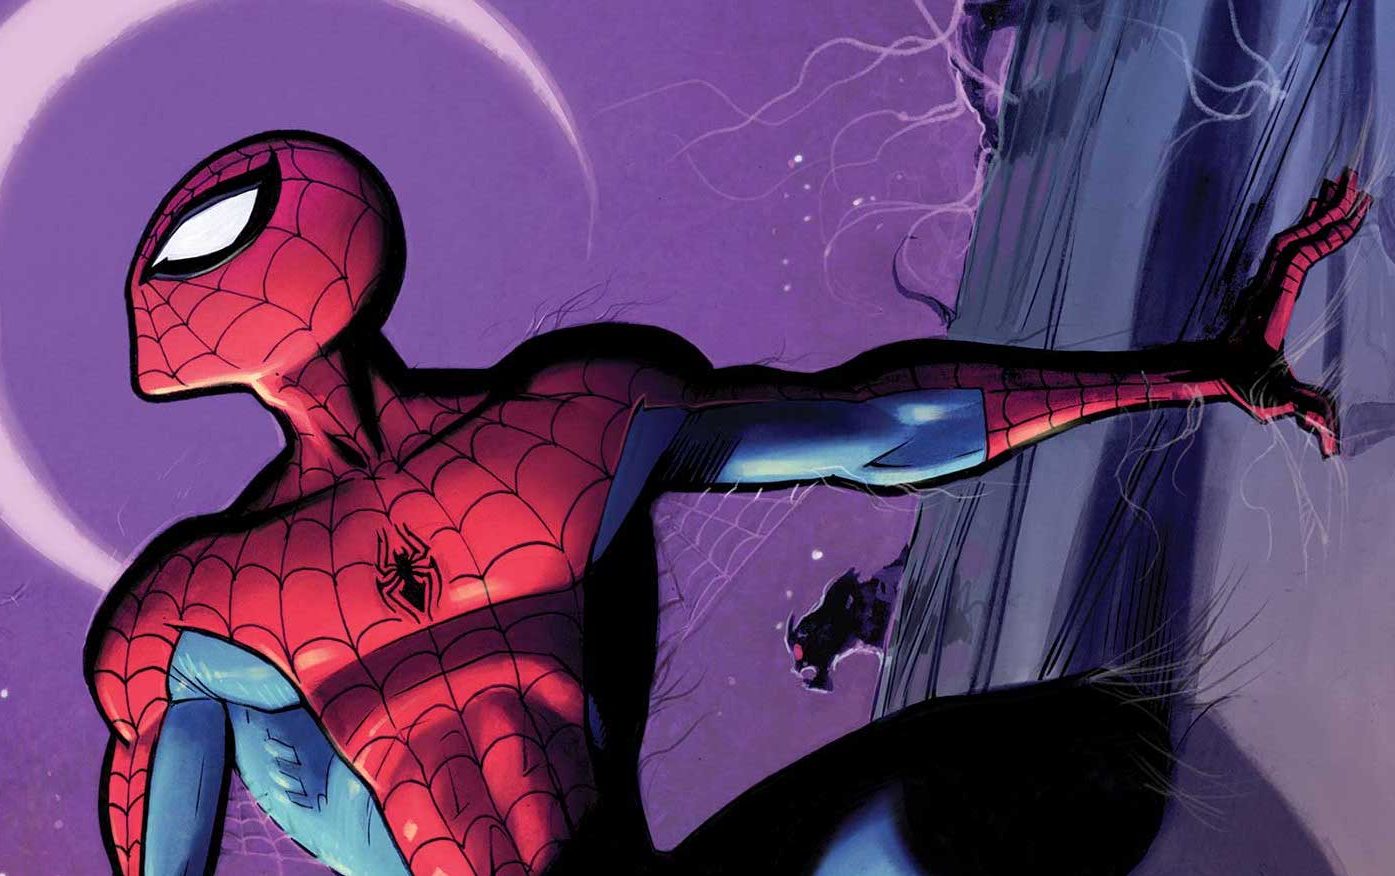 New 'Spine-Tingling Spider-Man' #1 launching October 18th